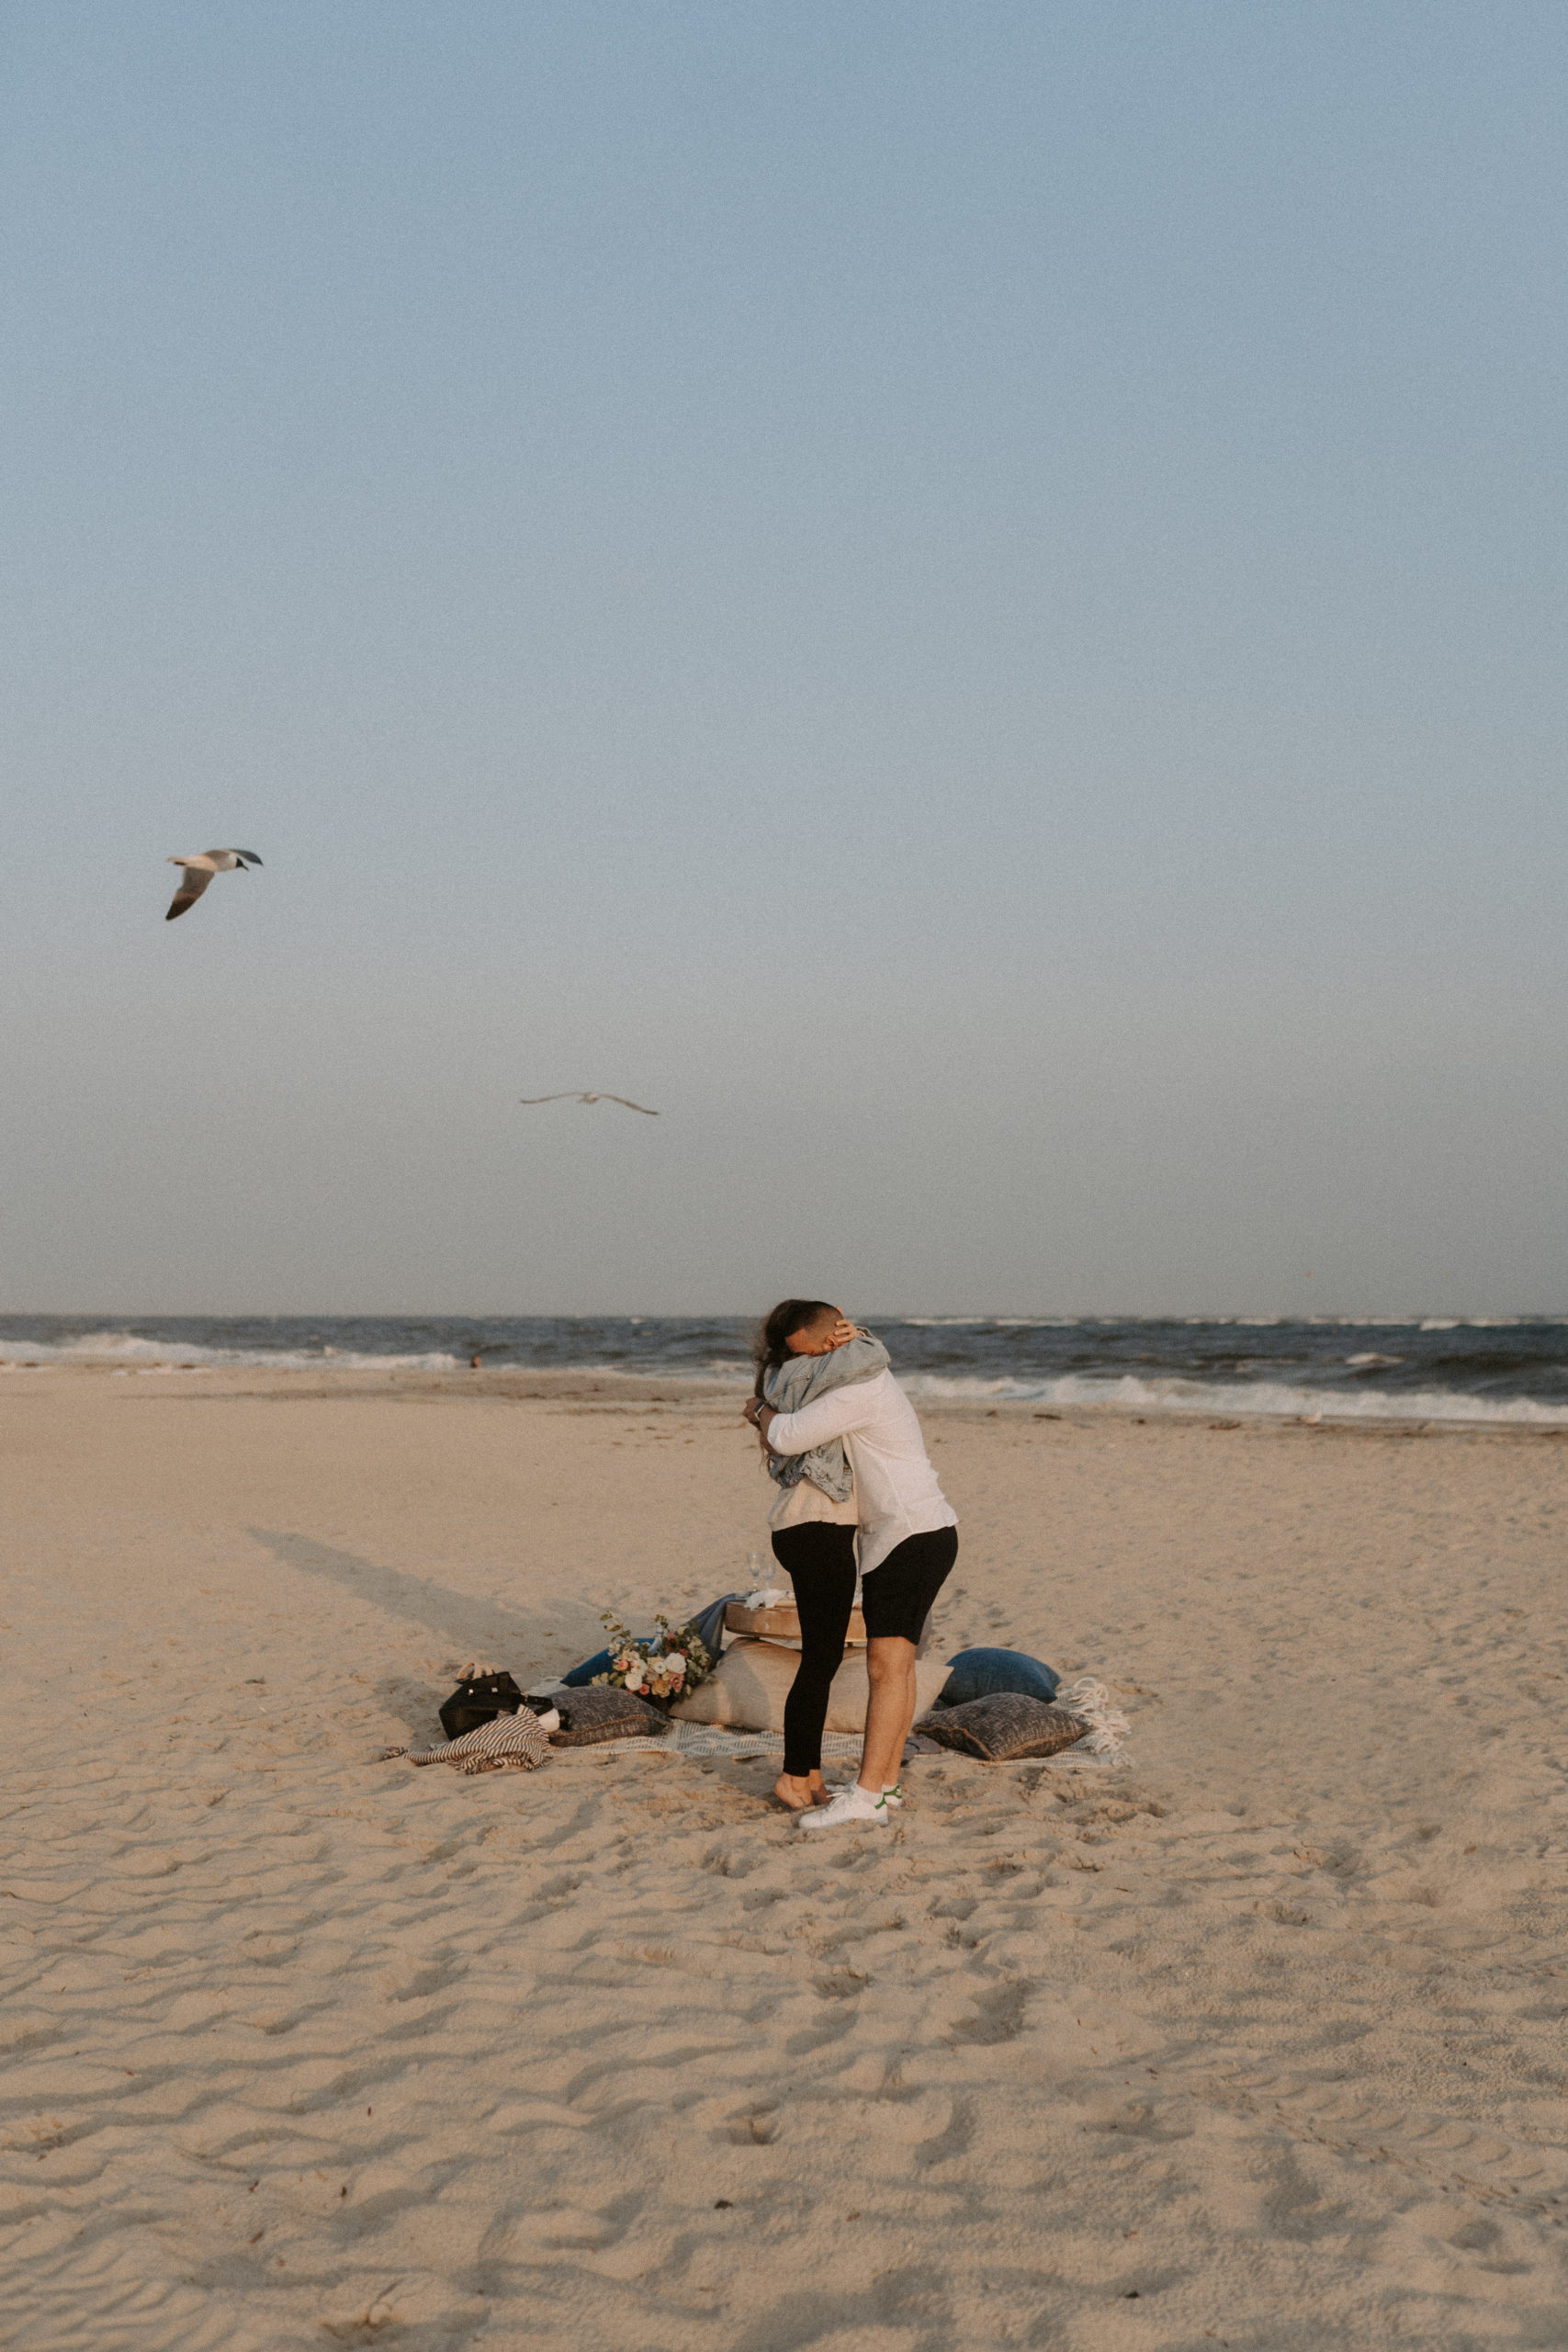 Man proposing to woman and hugging on the beach